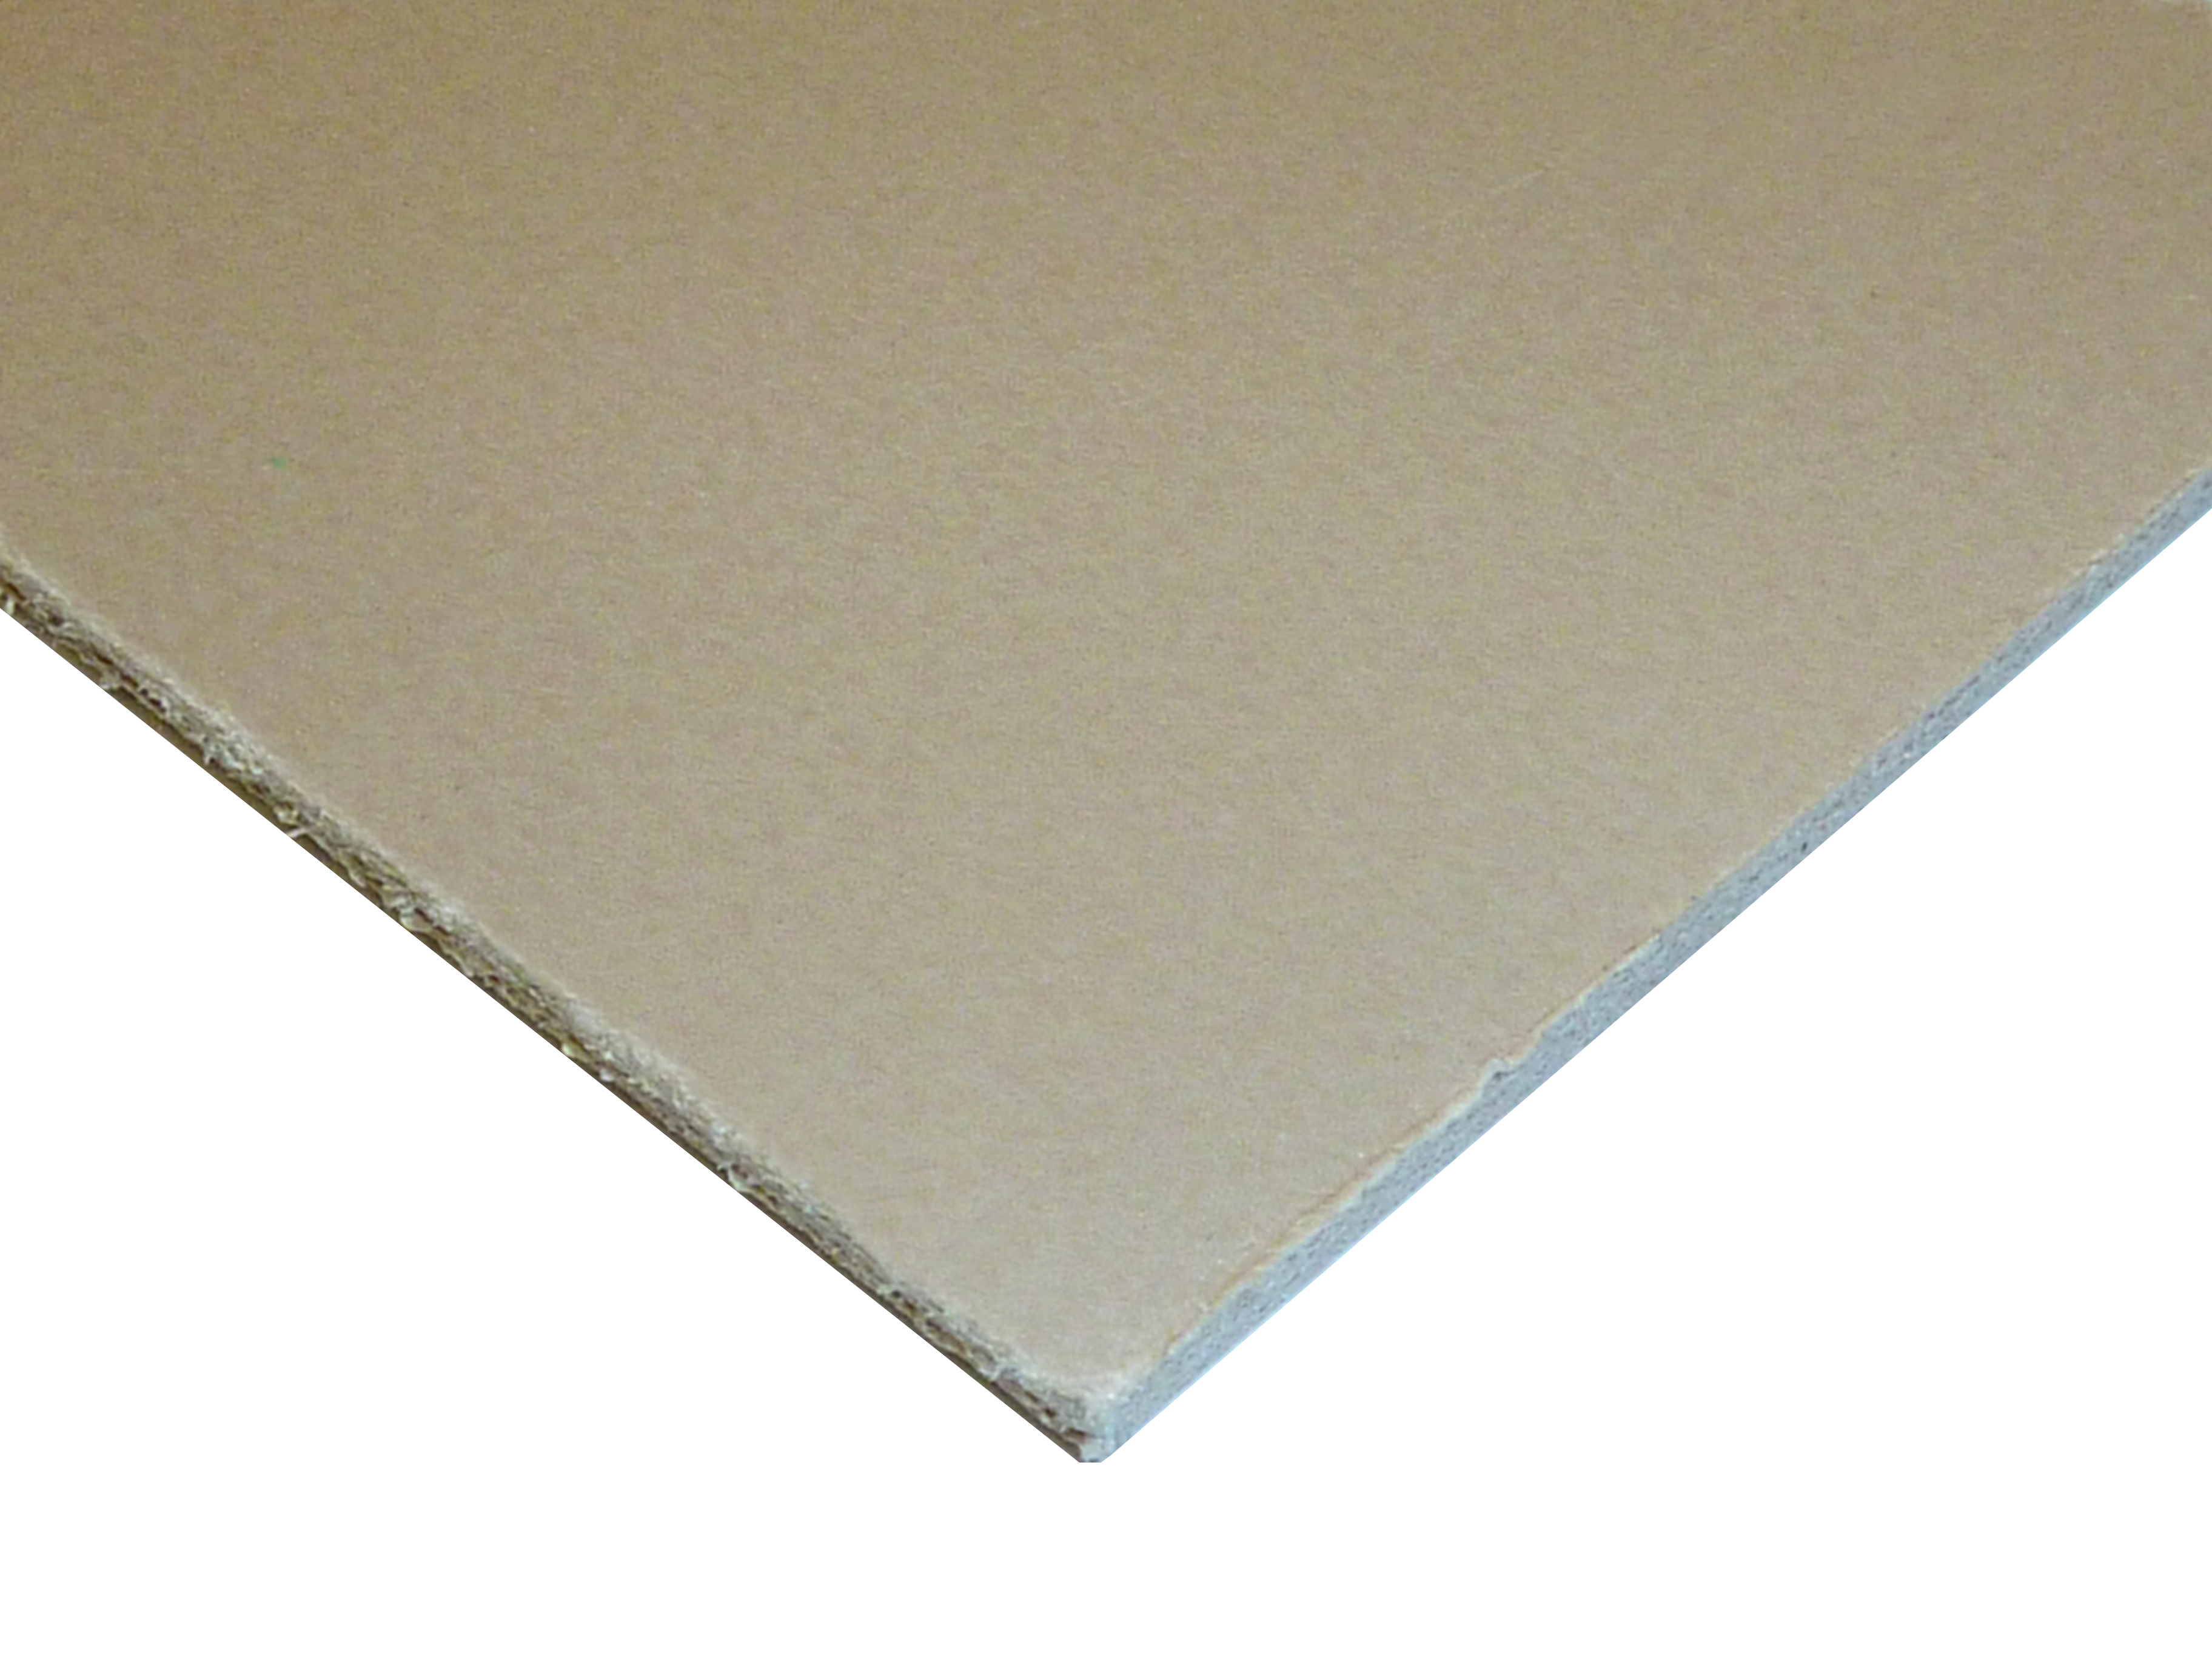 Beige / Tan Expanded PVC Sheets